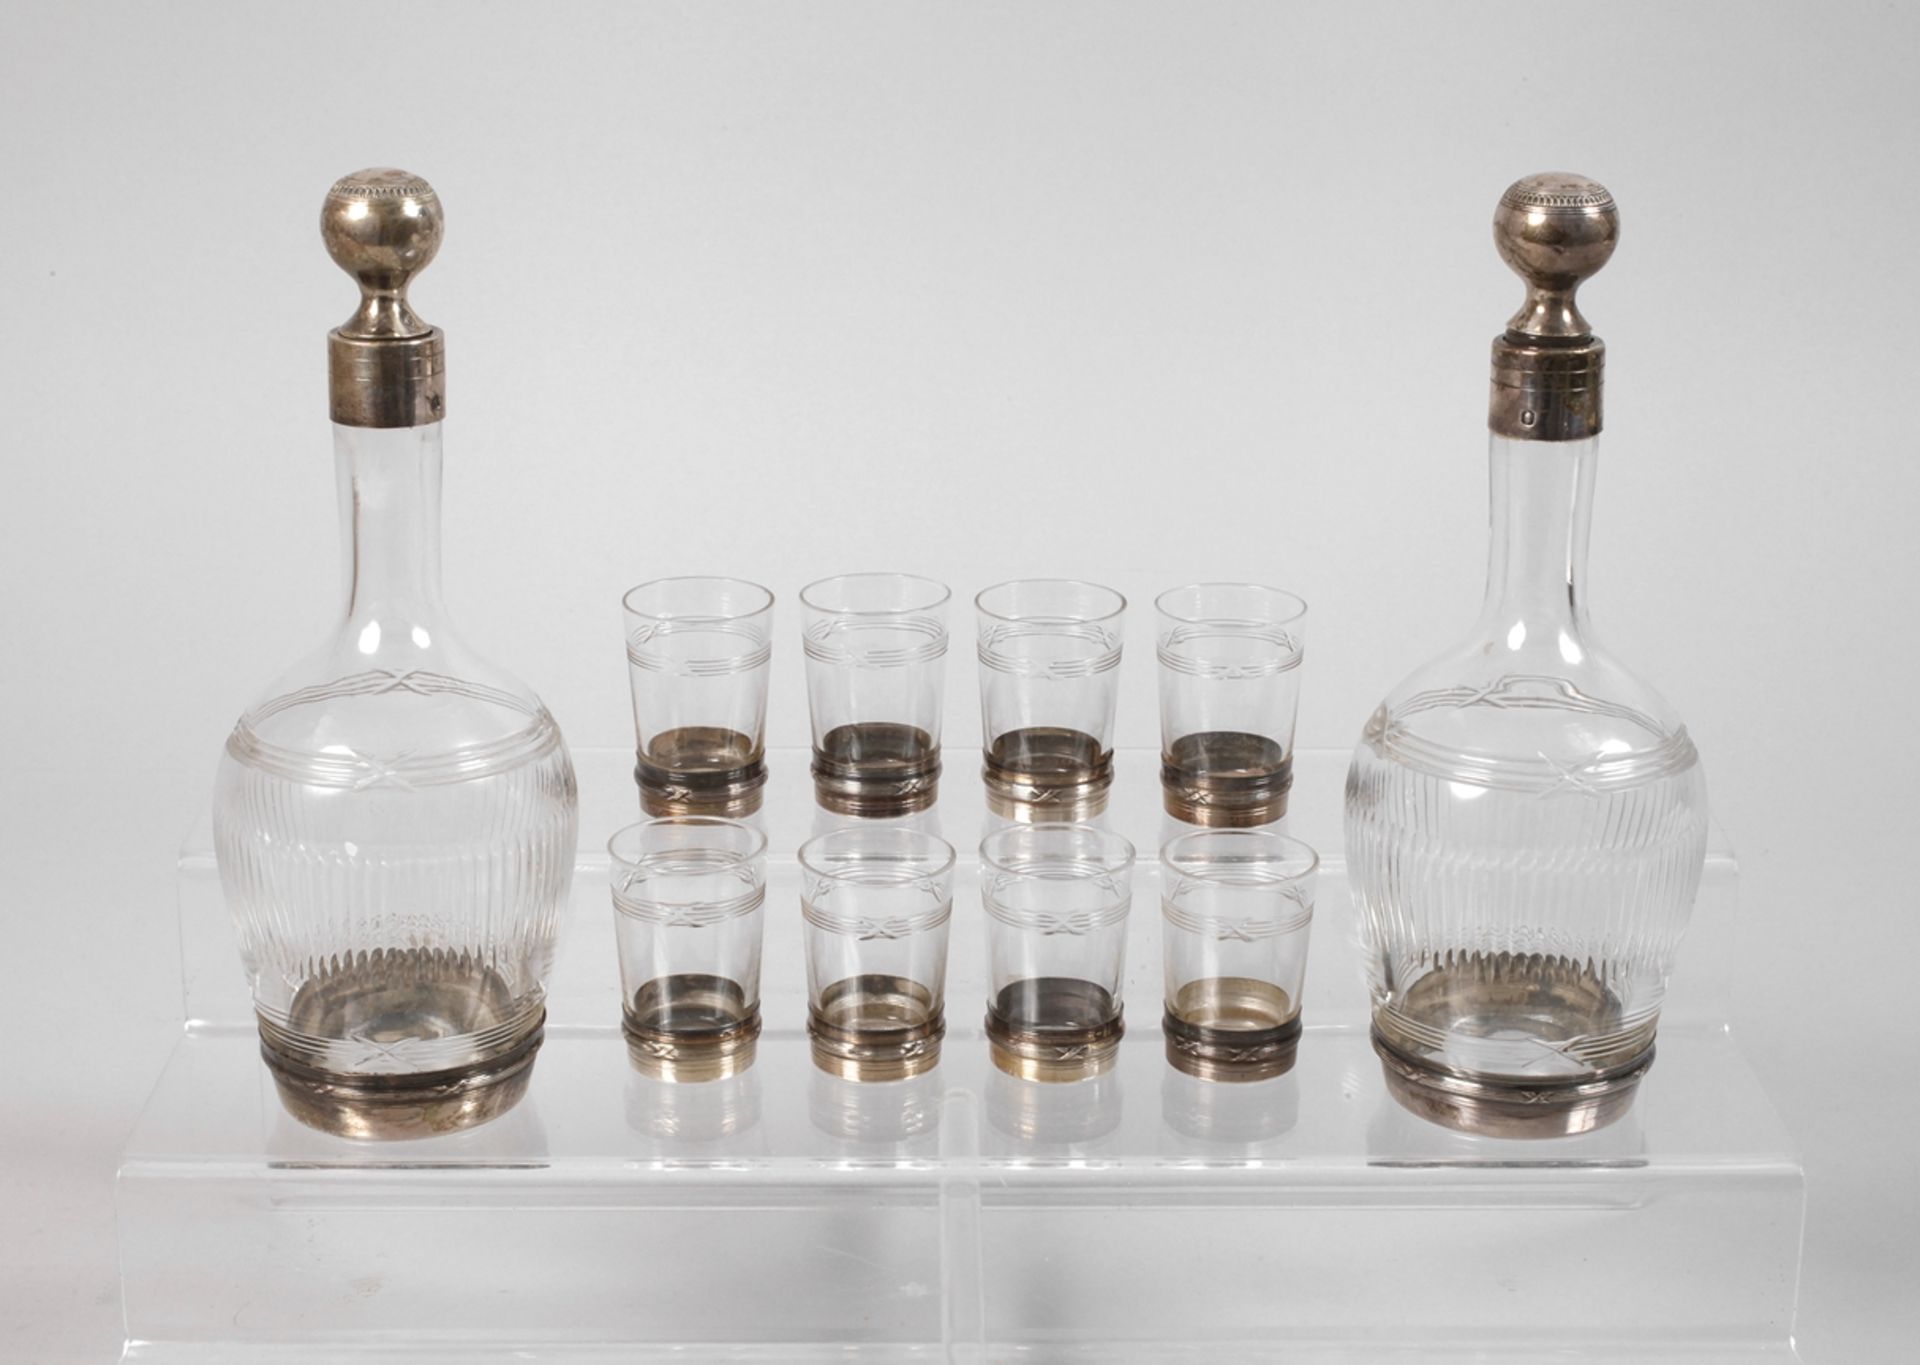 Two carafes and eight glasses with silver foot